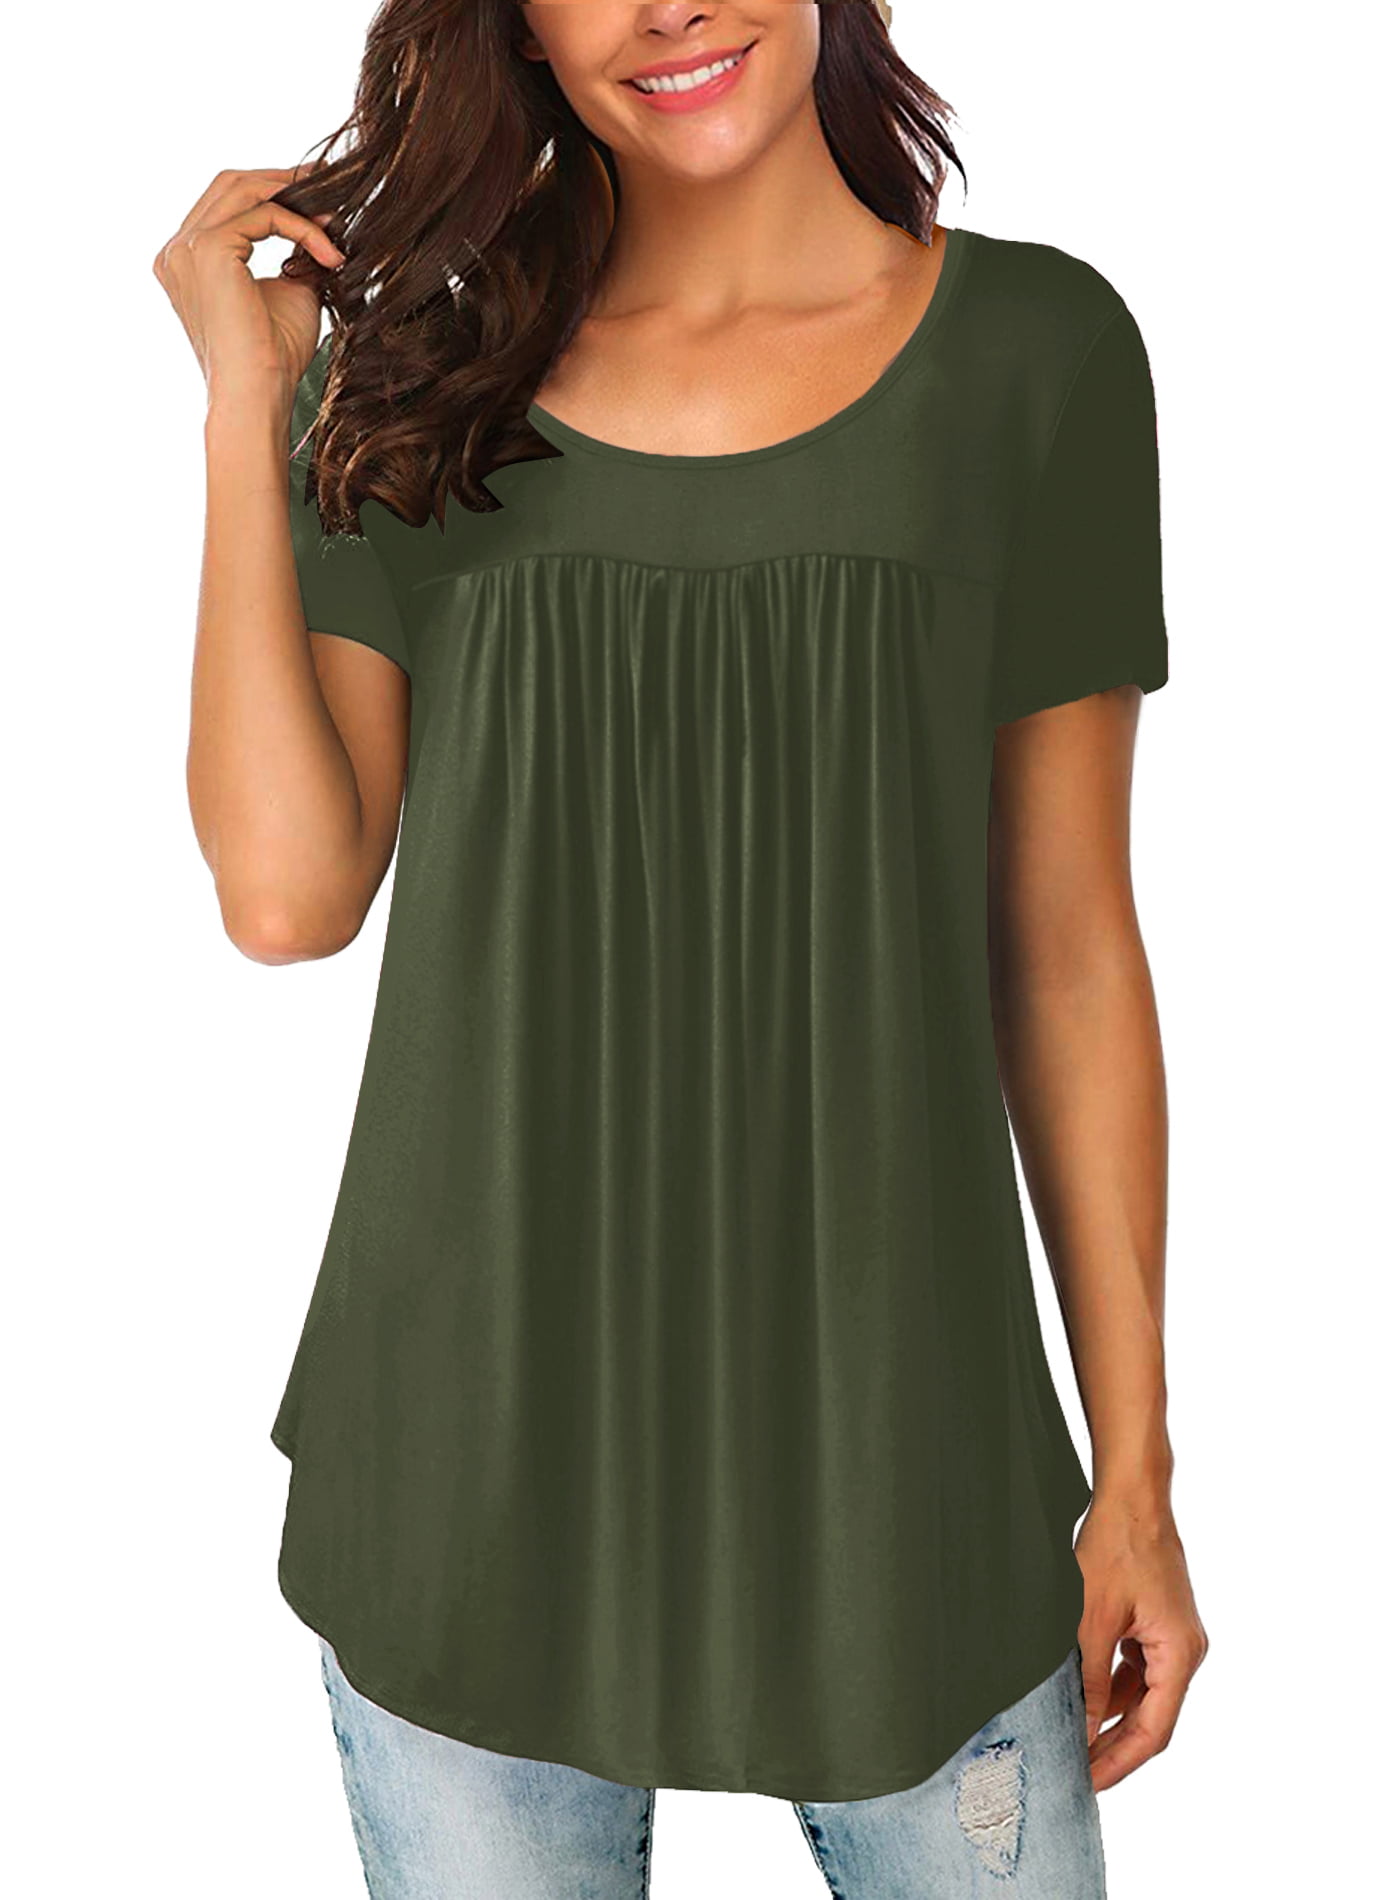 Womens Scoop Neck Pleated Tunic Tops Blouse Solid Color Shirts